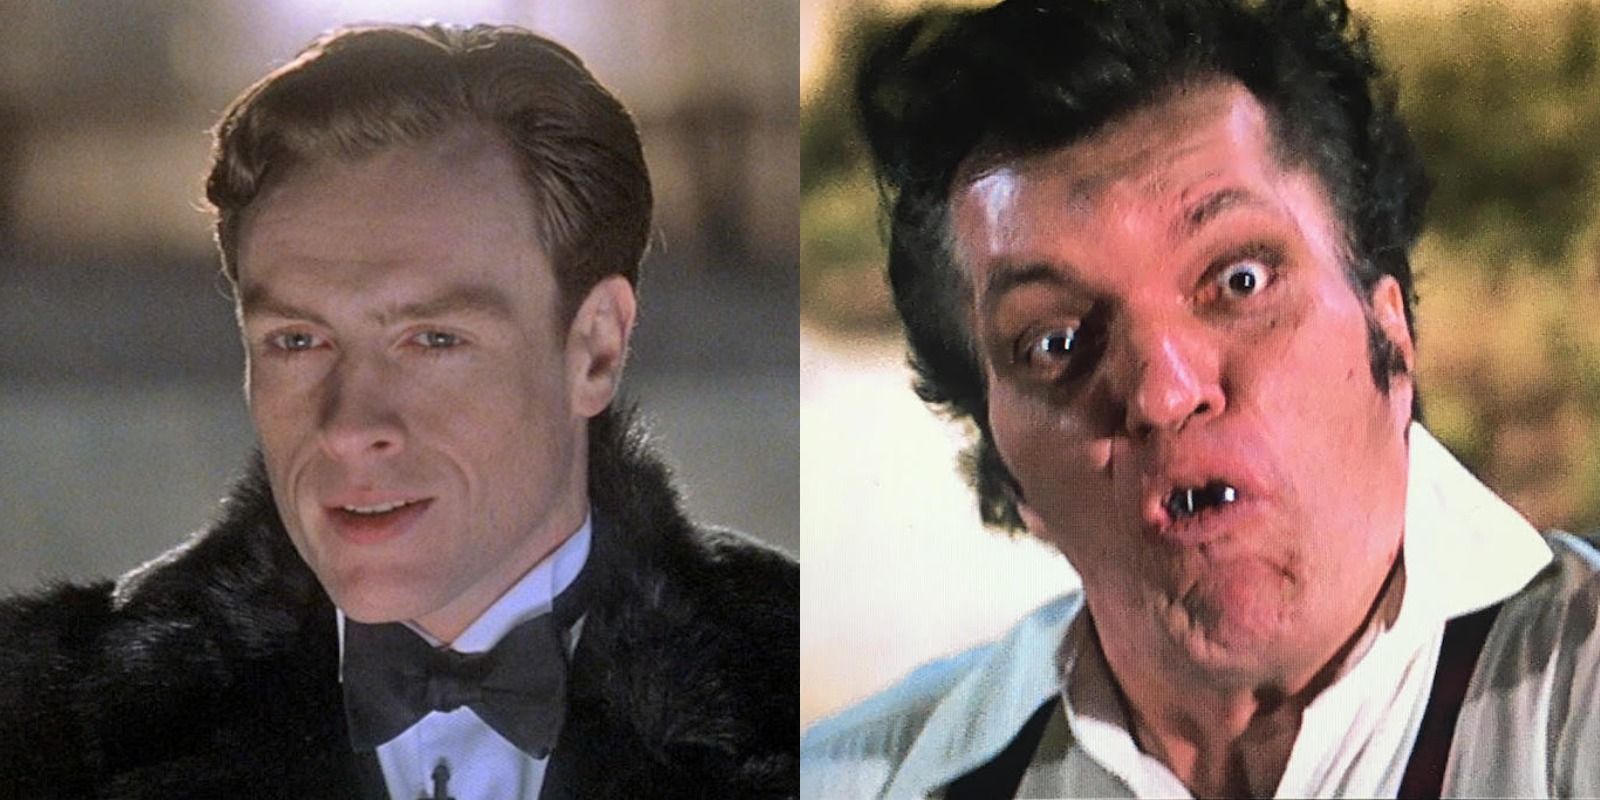 Two side by side images of James Bond villains.